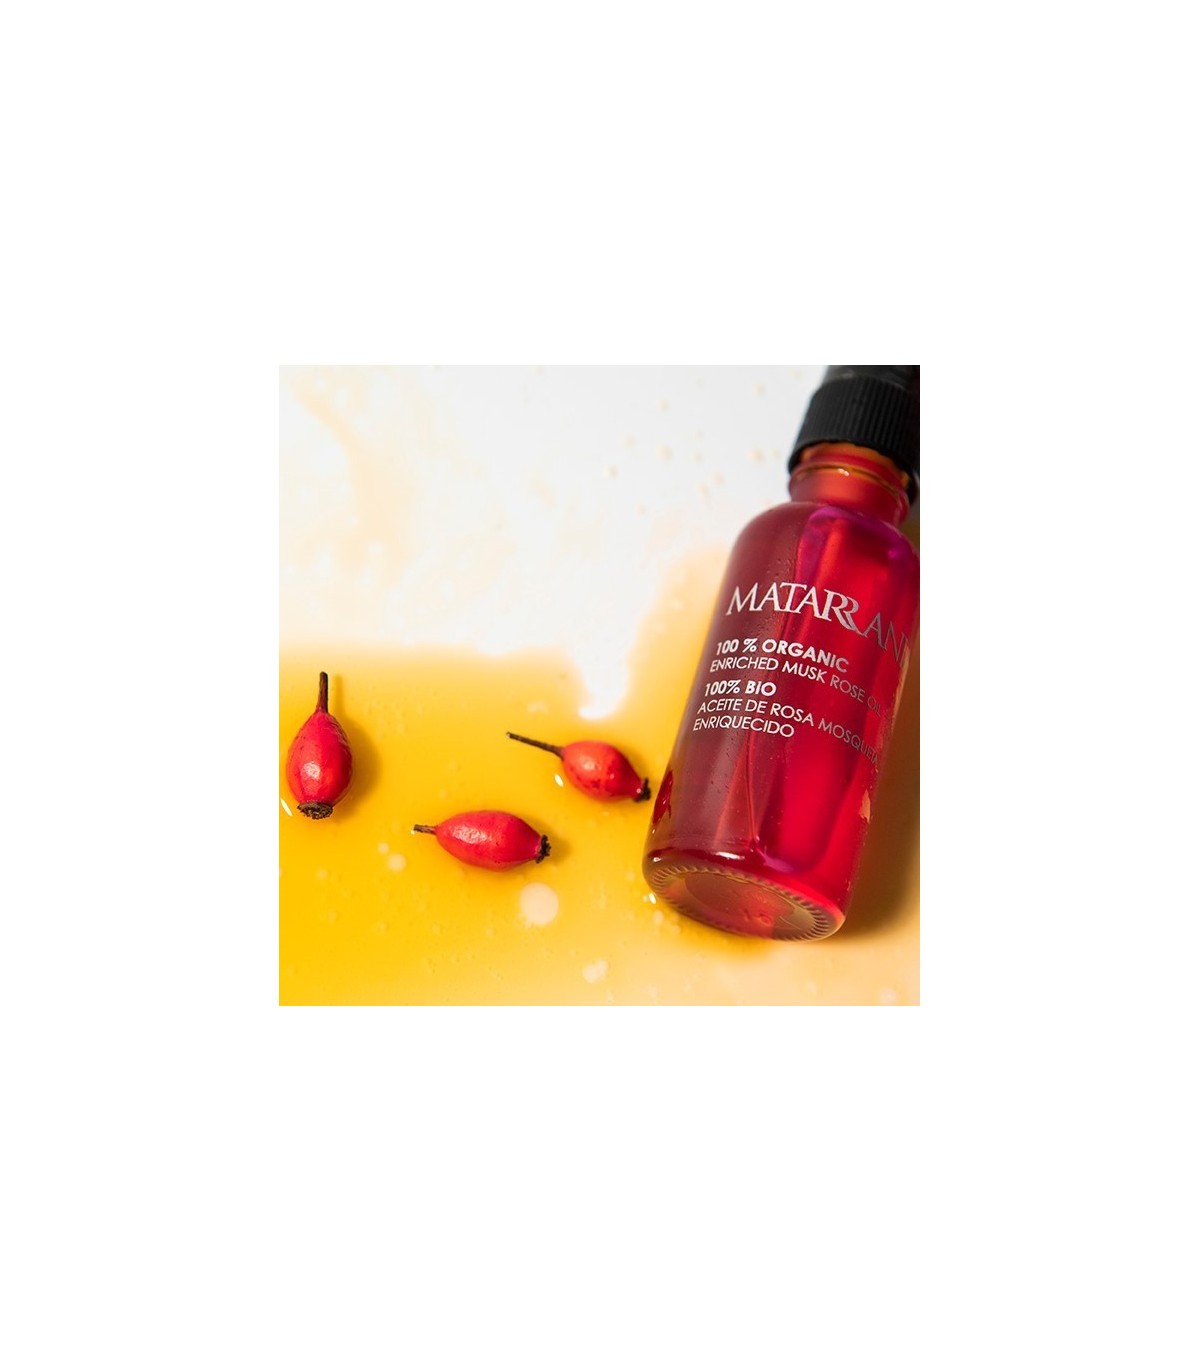 Enriched 100% Organic Rosehip Oil